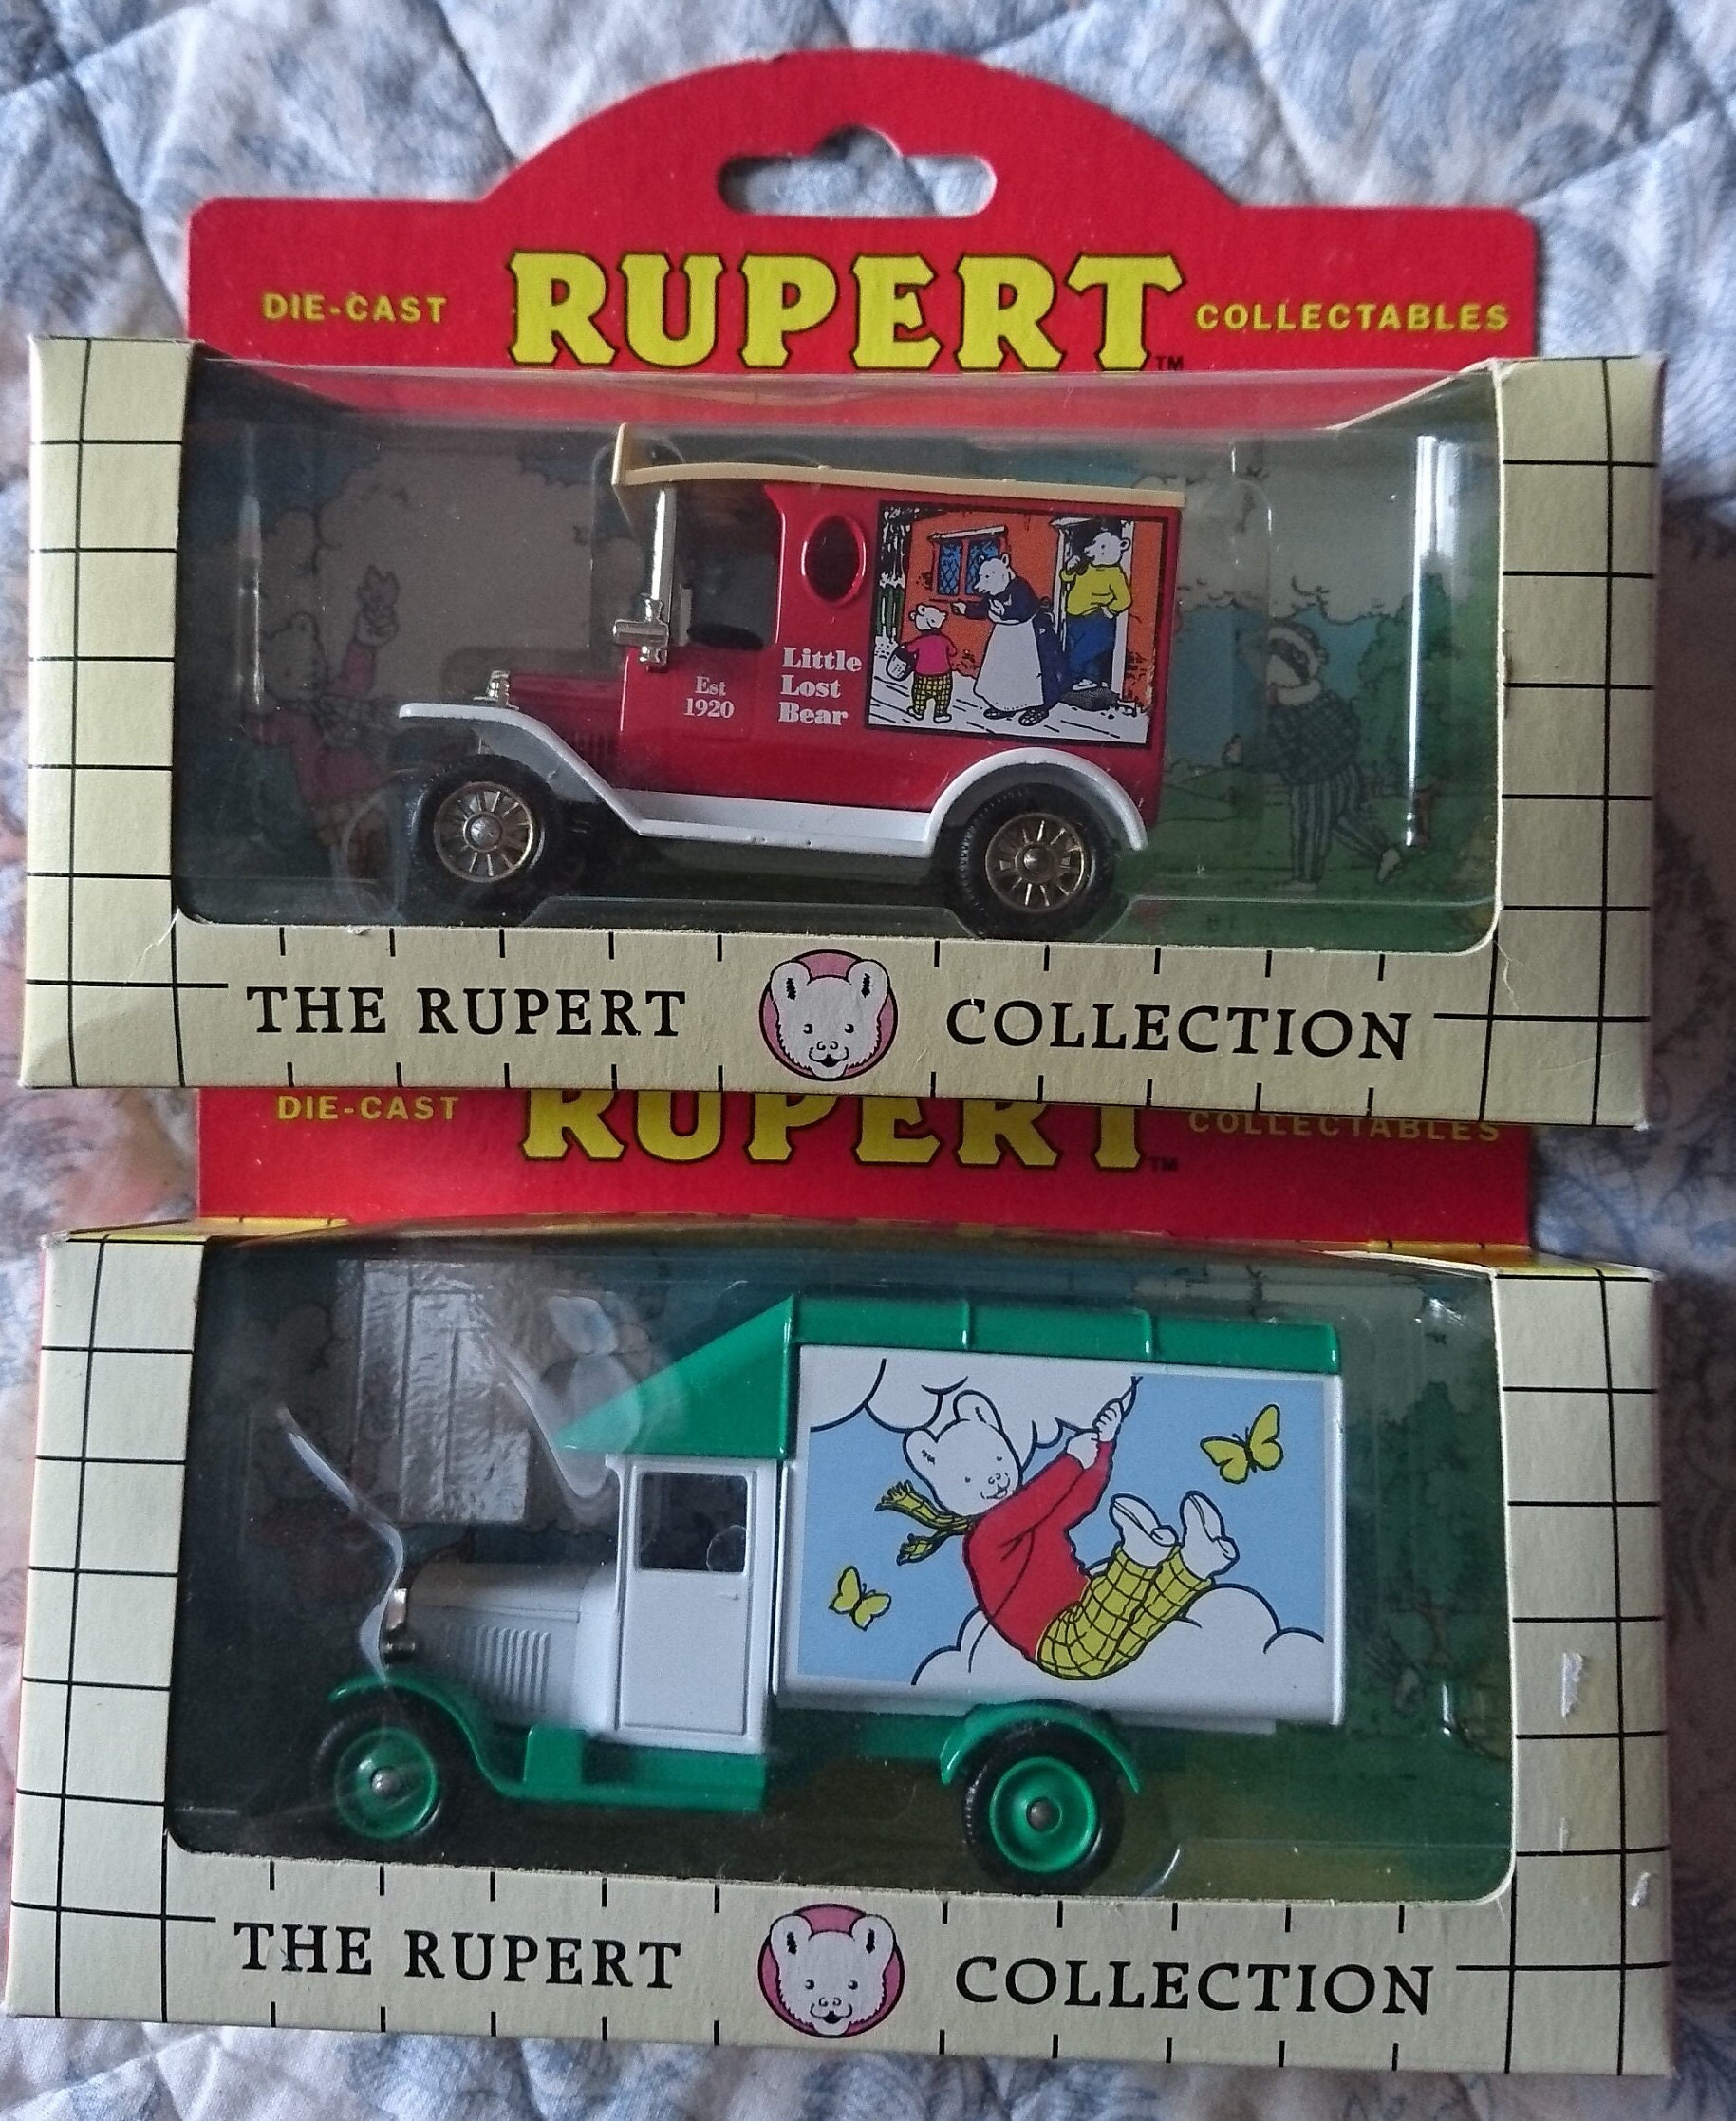 ORANGE & RED DELIVERY TRUCK MADE IN ENGLAND DIE CAST RUPERT COLLECTION Lledo RUPERT THE BEAR. 